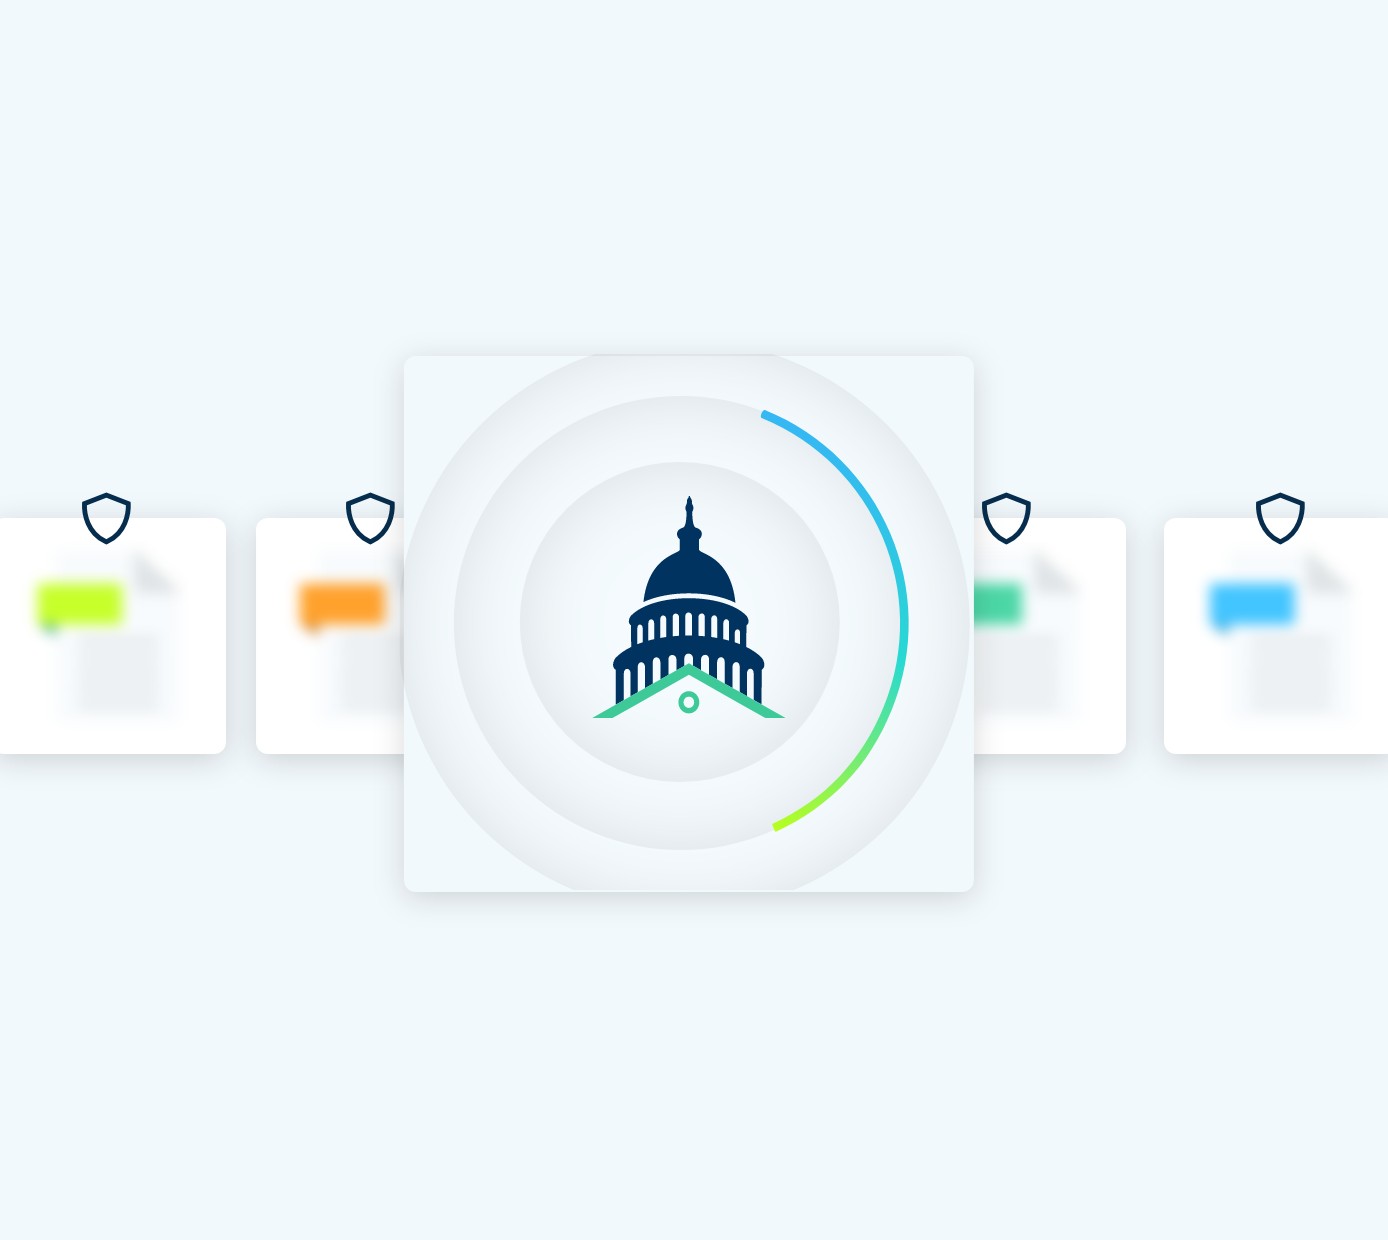 US Capitol building icon selected in a menu